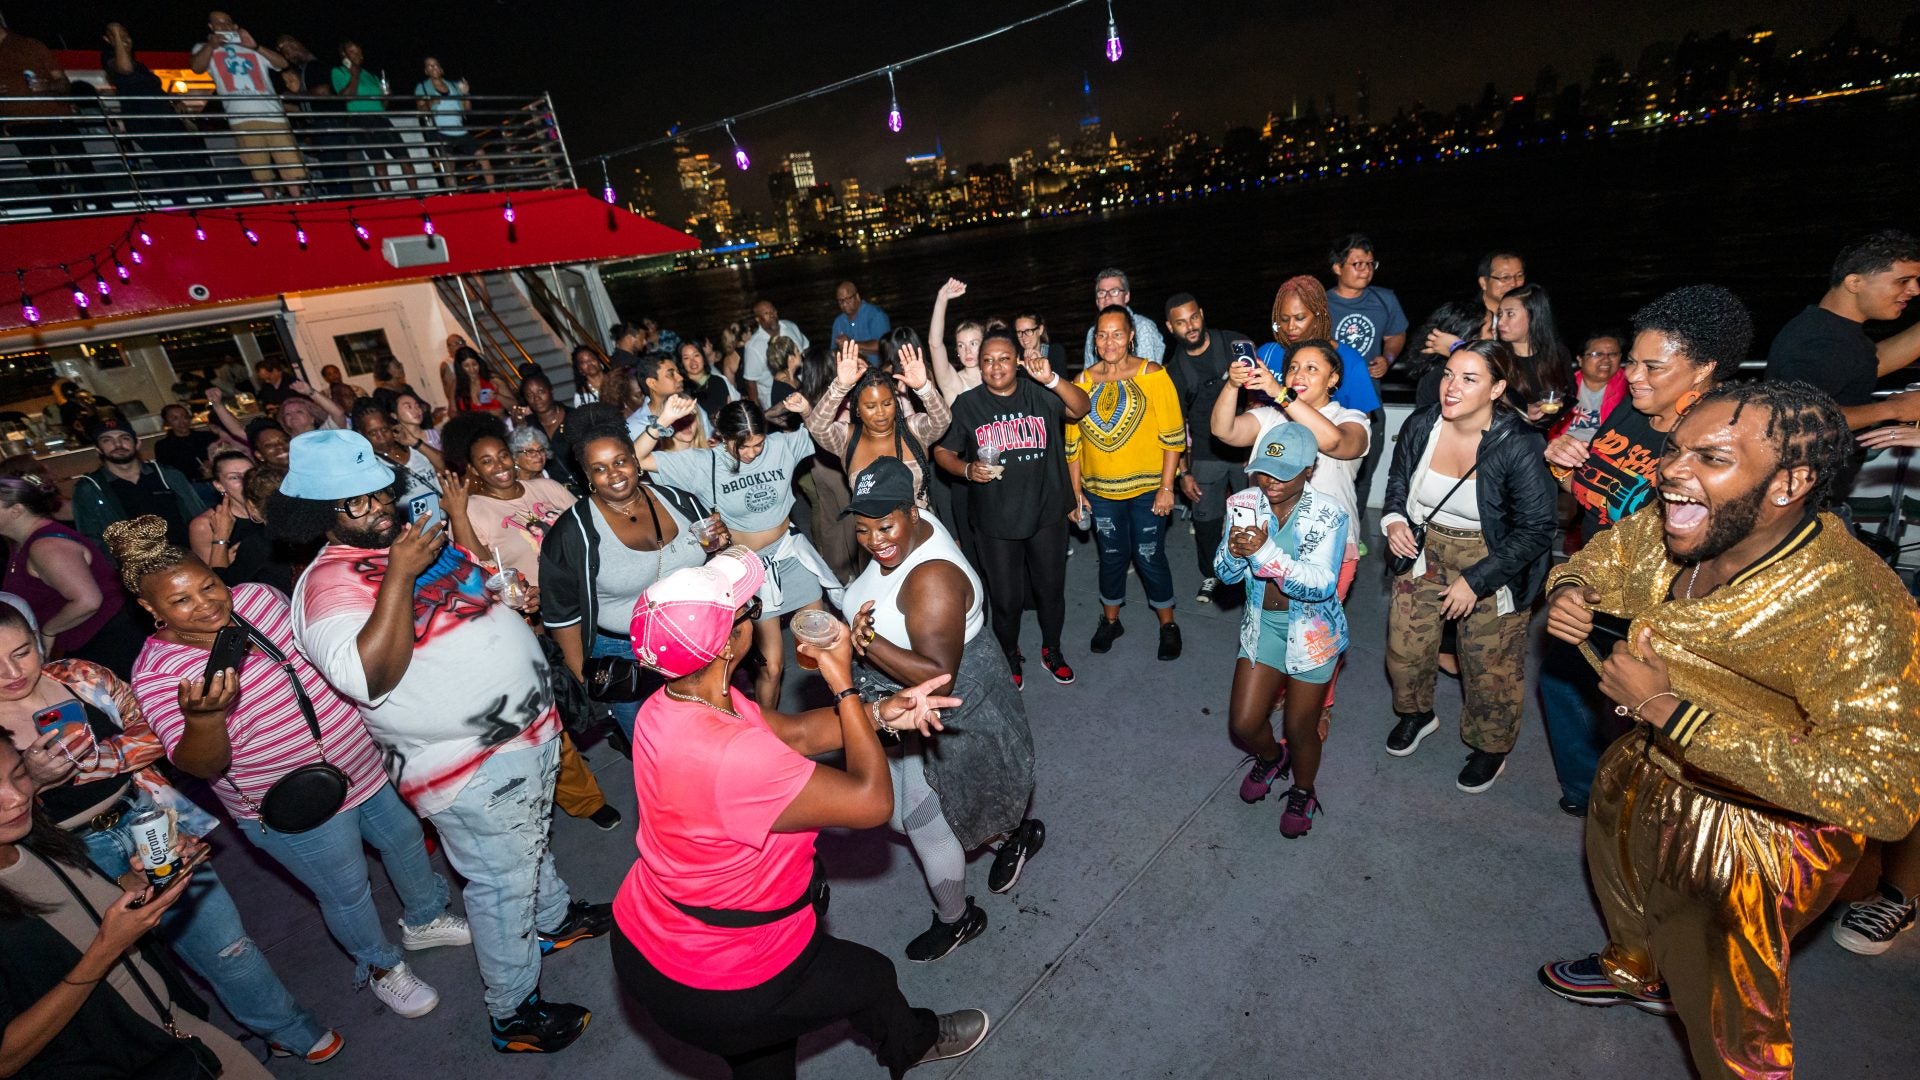 This NYC Sightseeing Cruise Celebrated Missy Elliott And 50 Years Of Hip-Hop With Help From DJ Spinderella